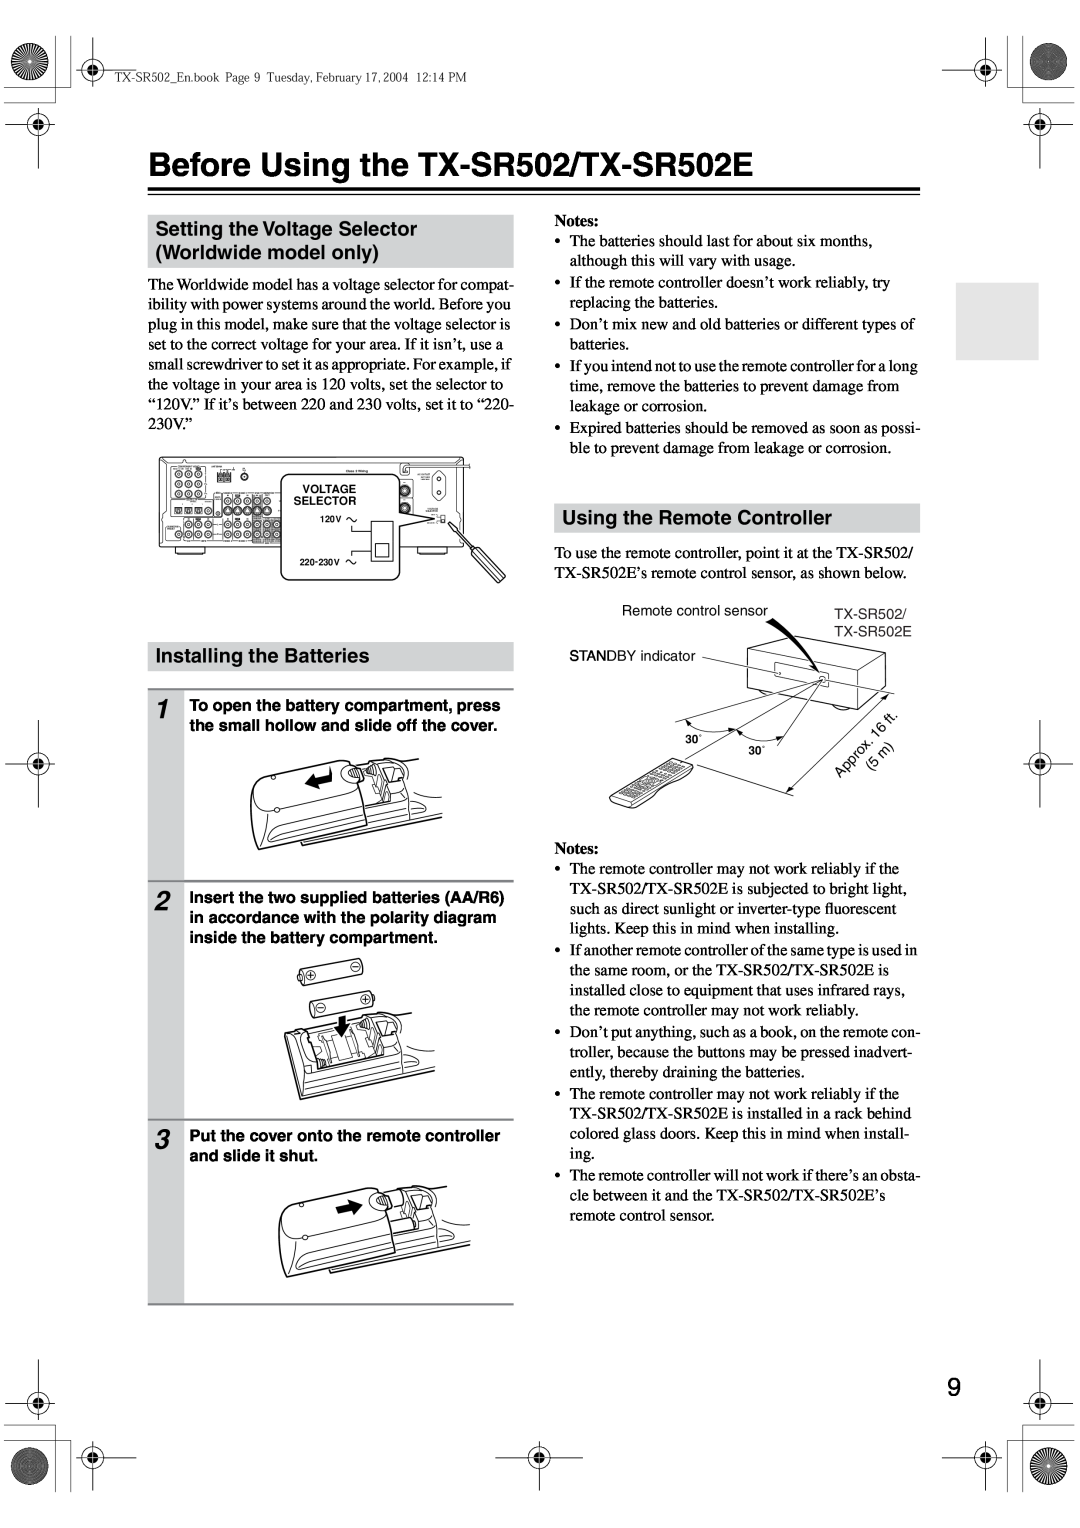 Onkyo instruction manual Before Using the TX-SR502/TX-SR502E, Installing the Batteries, Using the Remote Controller 